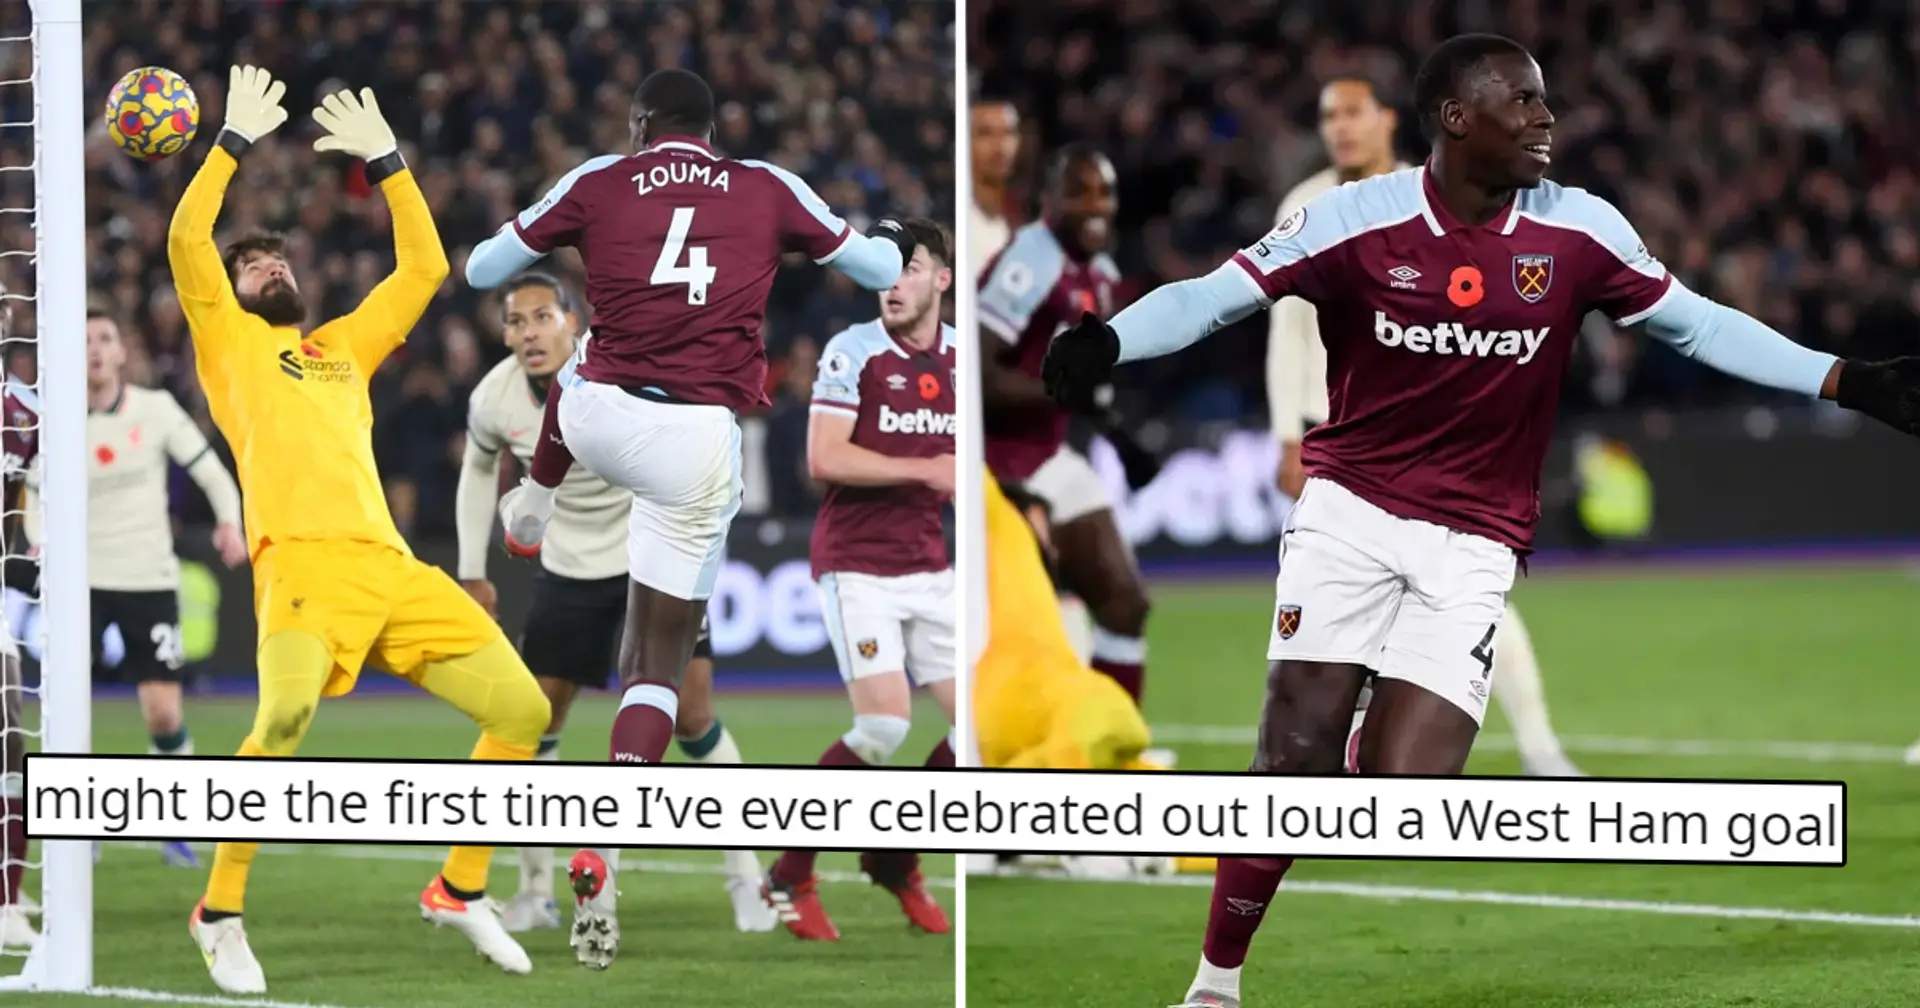 'You're welcome, West Ham', 'so happy for him': Chelsea fans react to Zouma's winning goal vs Liverpool